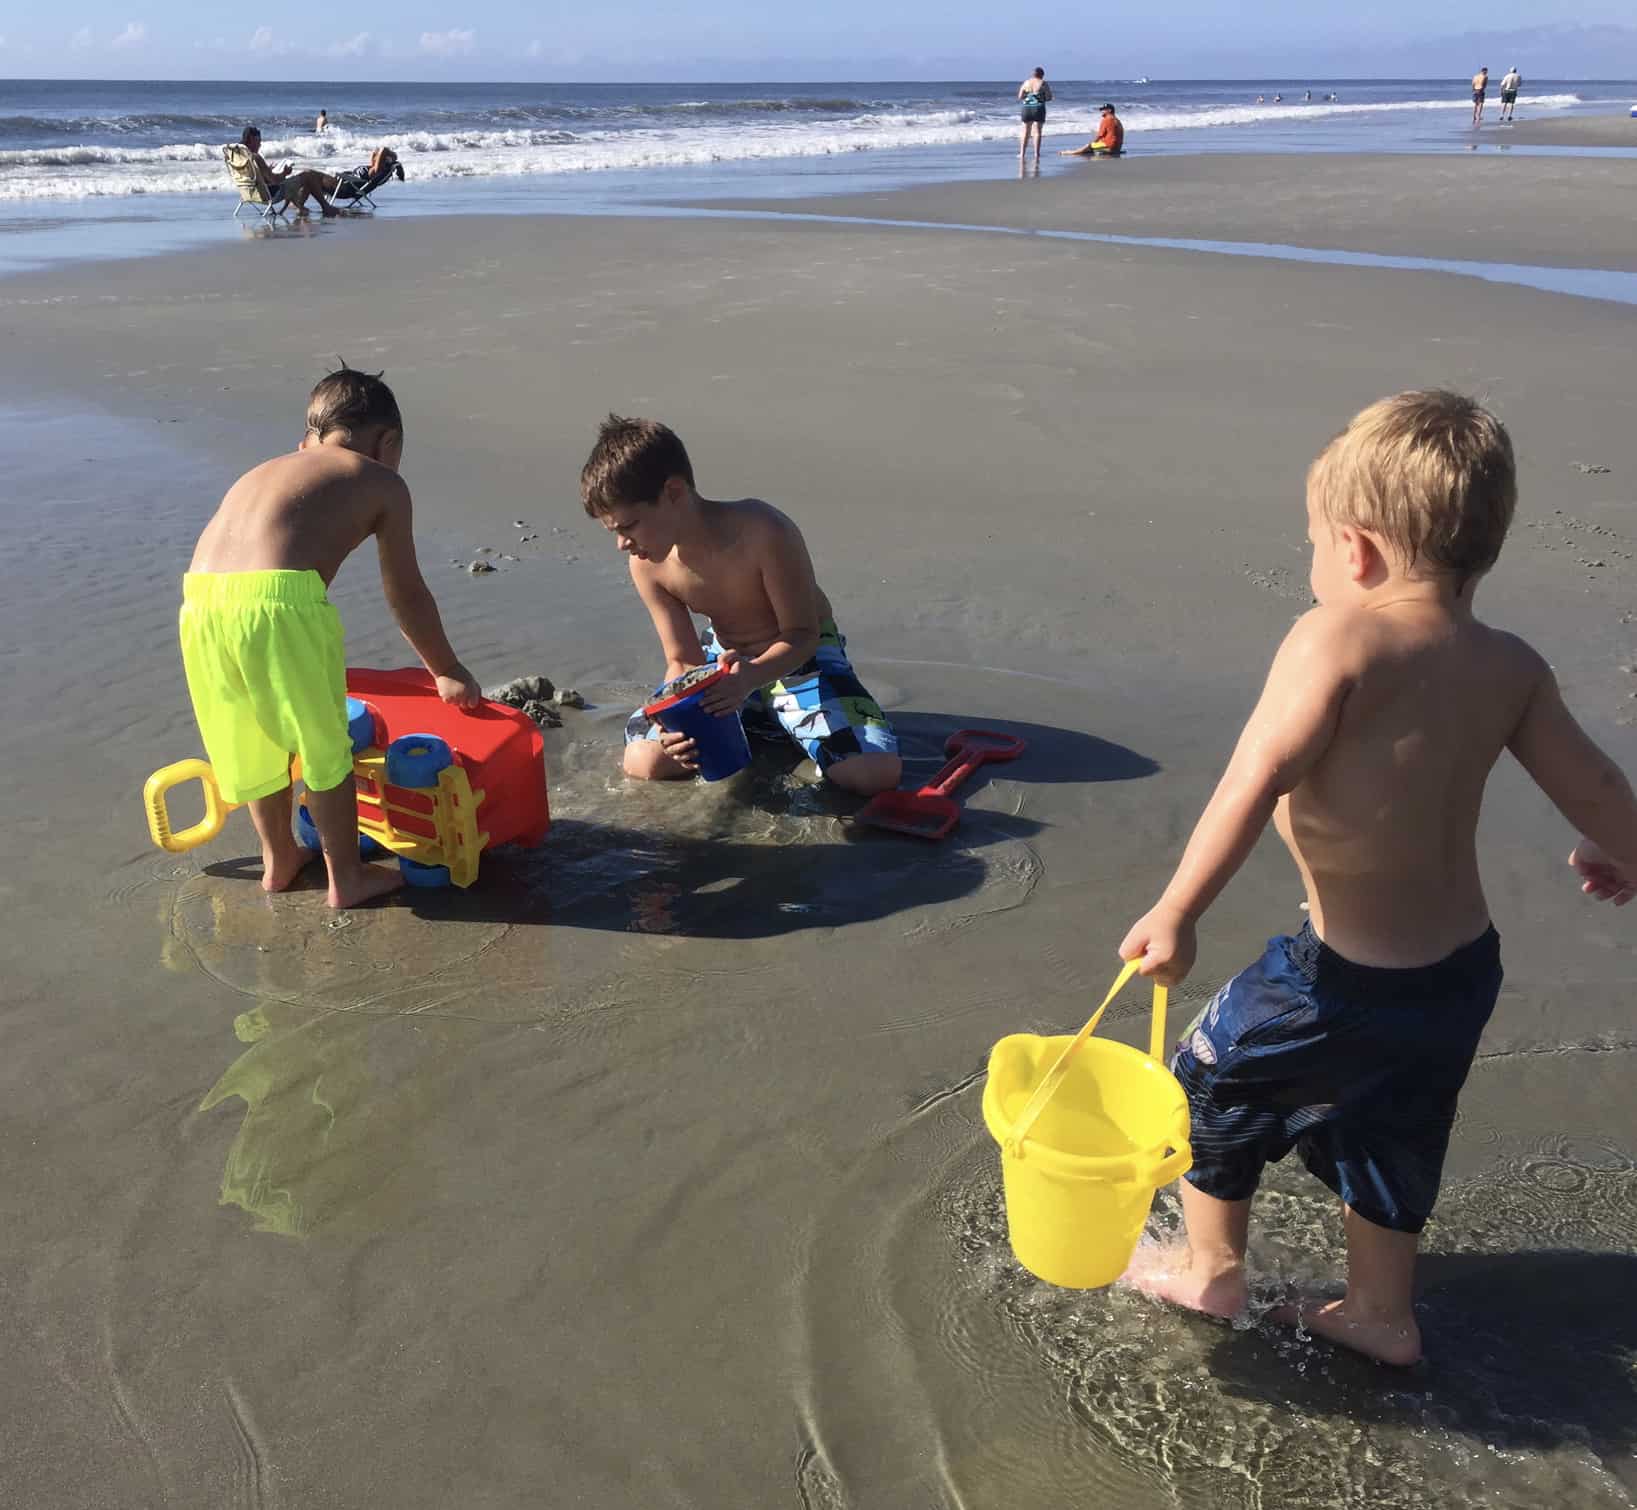 Meeting New Friends at the Beach - Autism Travel